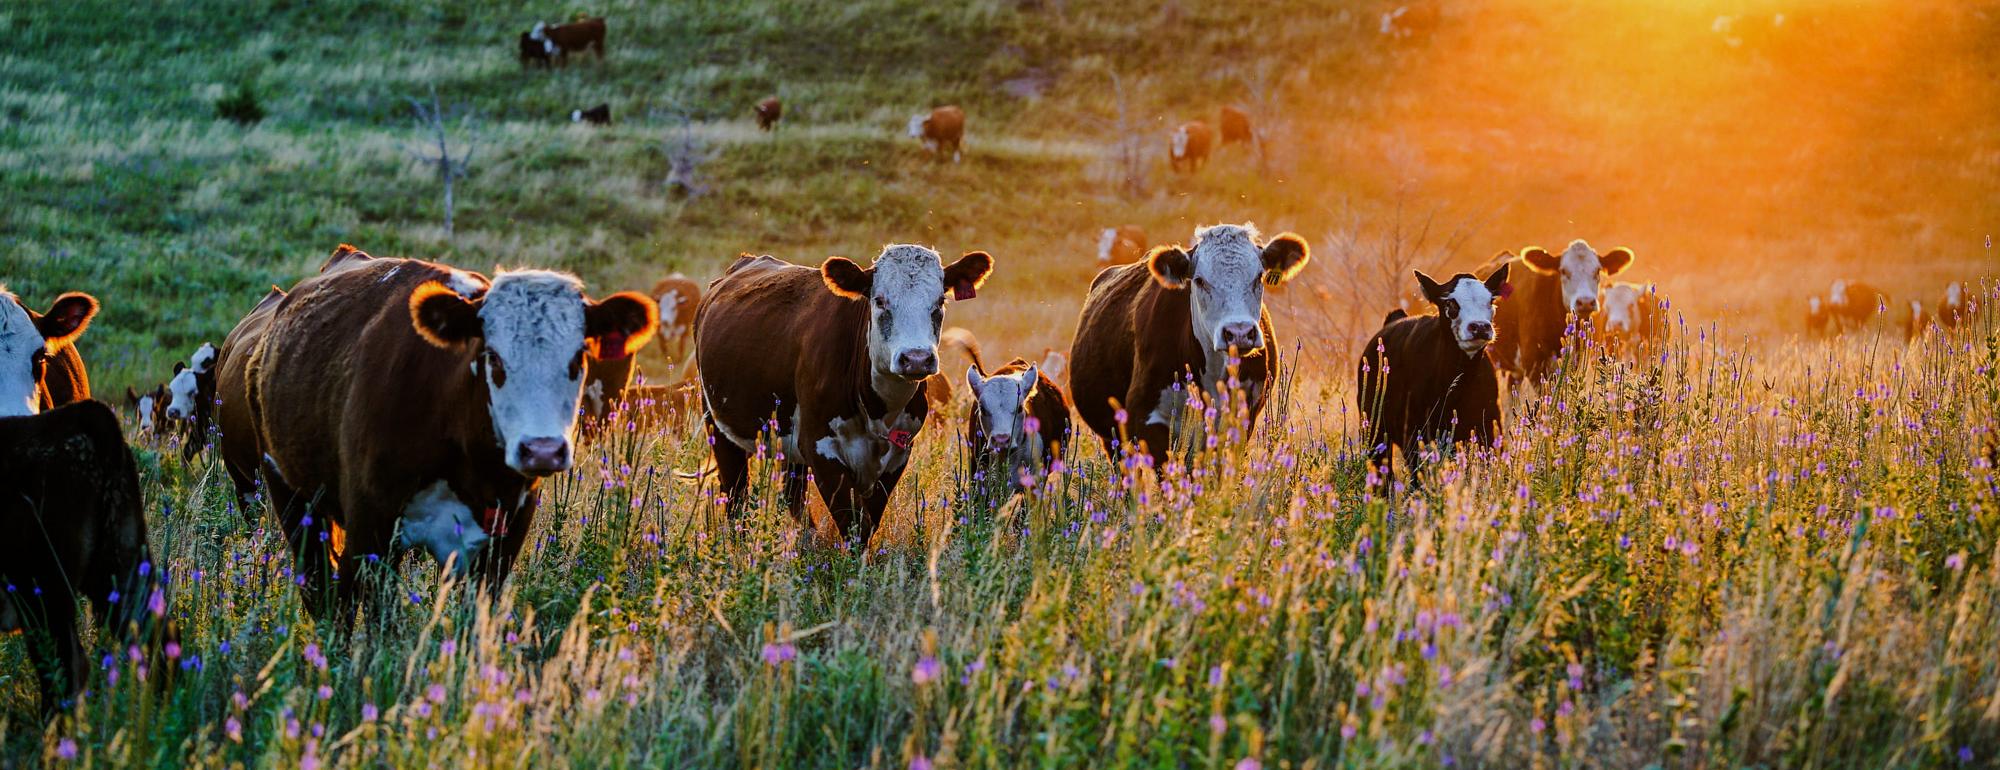 CLEAR Center Newsletter Signup Cattle Grazing in Field of Flowers at Sunset